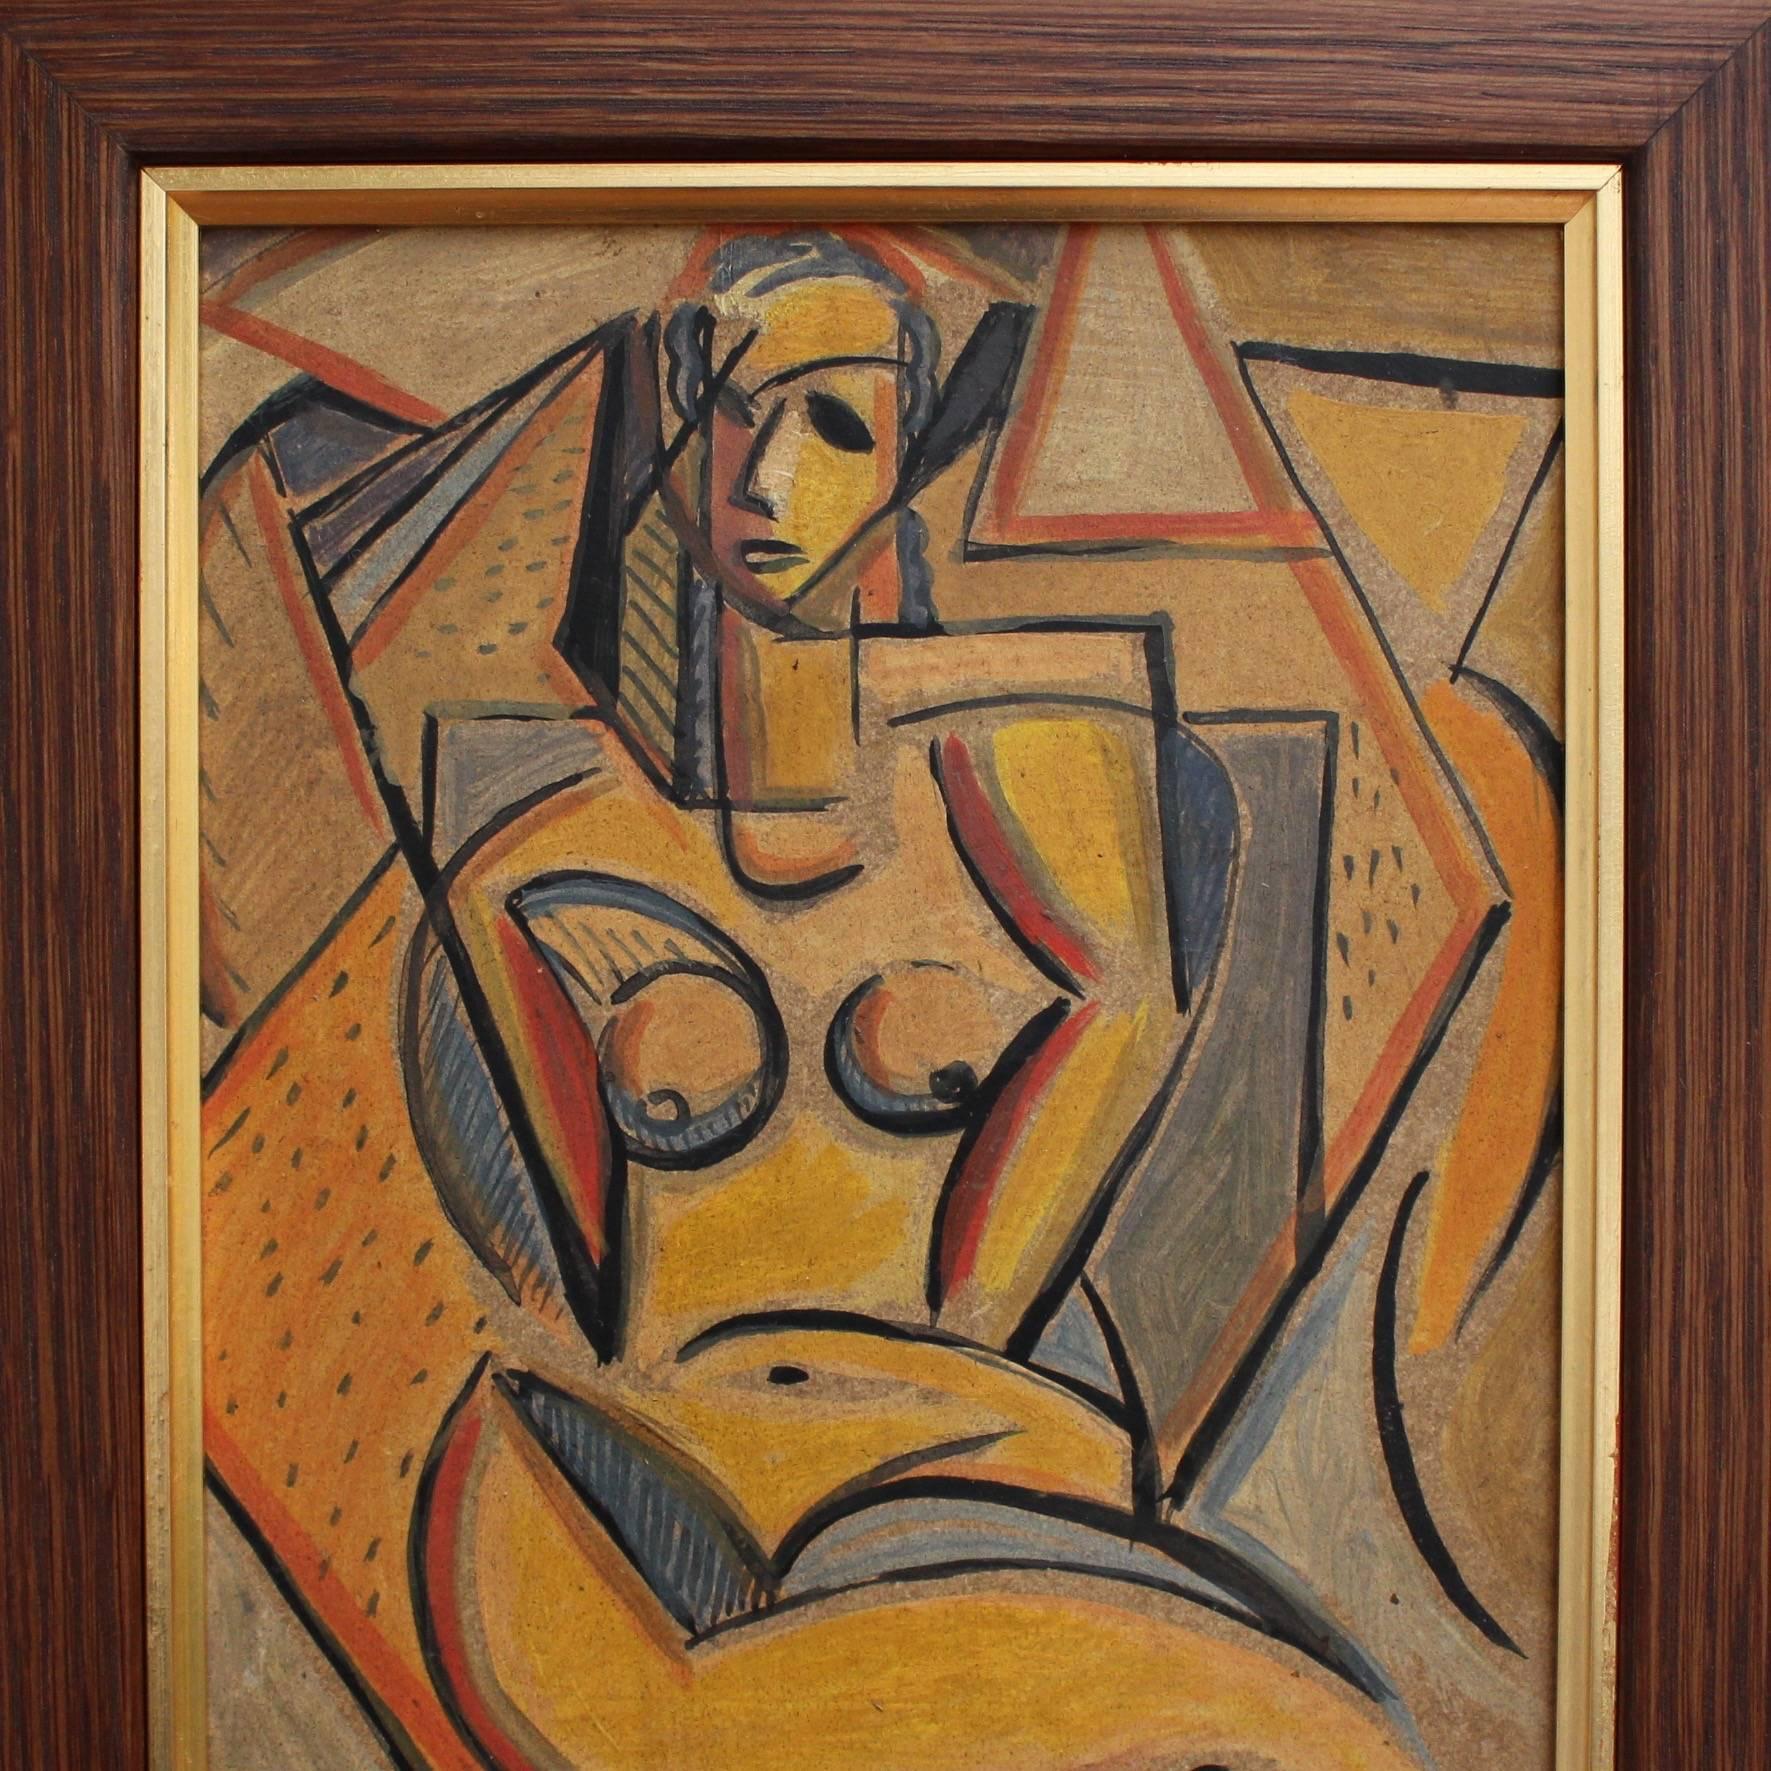 Portrait of a Sunbathing Nude - Cubist Painting by Unknown